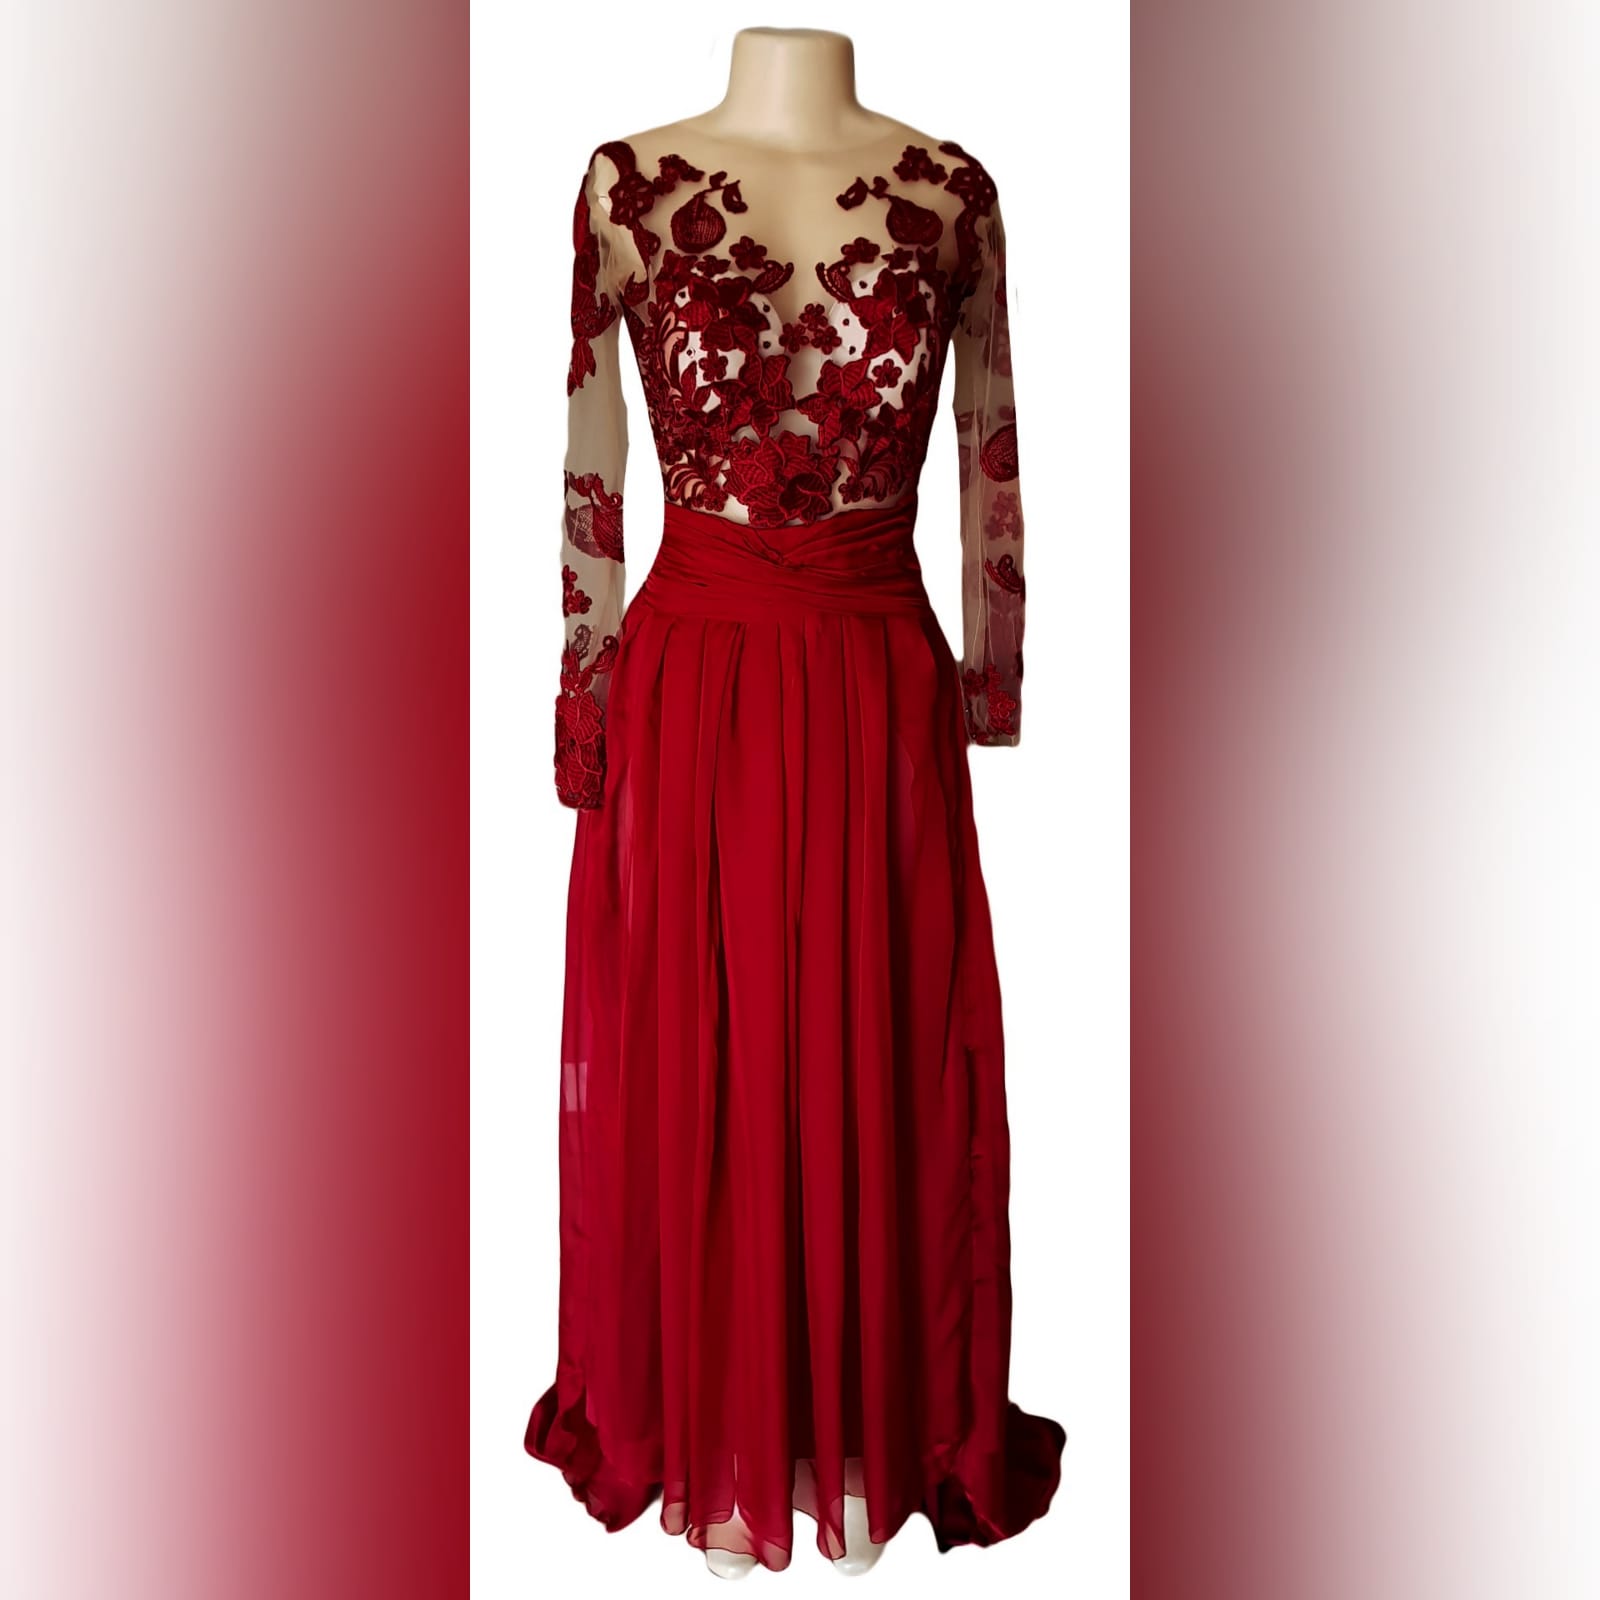 Red lace and chiffon prom dress 6 red lace and chiffon prom dress with an illusion lace bodice, illusion open back and sleeves detailed with lace and beads. A gathered chiffon bottom with a ruched belt a sheer slit and a train.